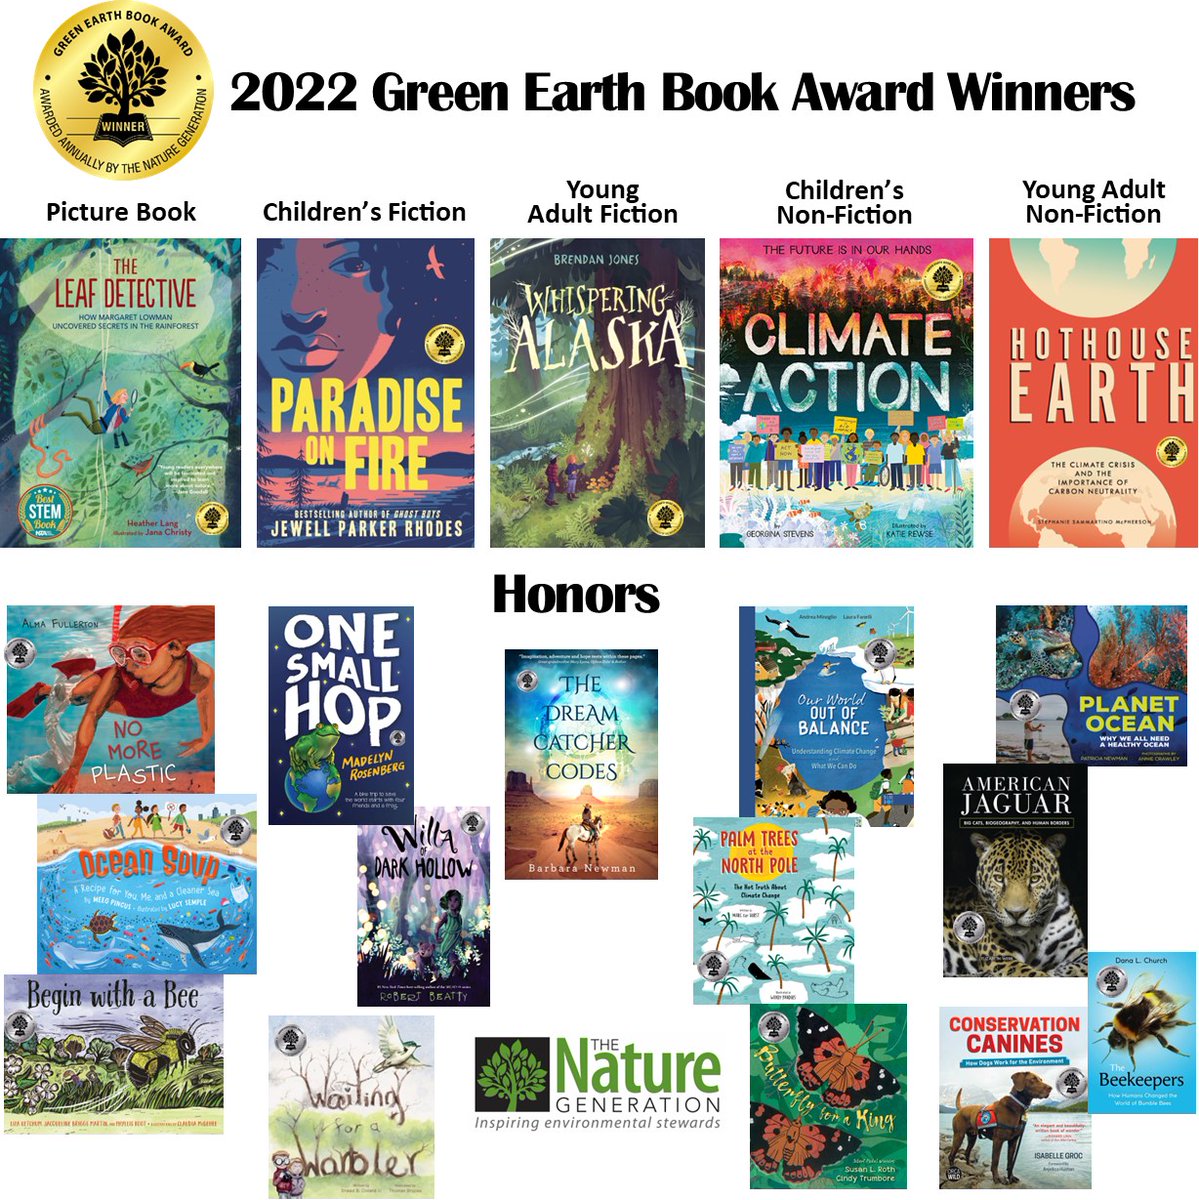 Happy Earth Day!! NatGen is proud to announce our 2022 Green Earth Book Award winners, honor books, and recommended reading. So many great books about the environment for children and young adults! find out more at NatGen.org.